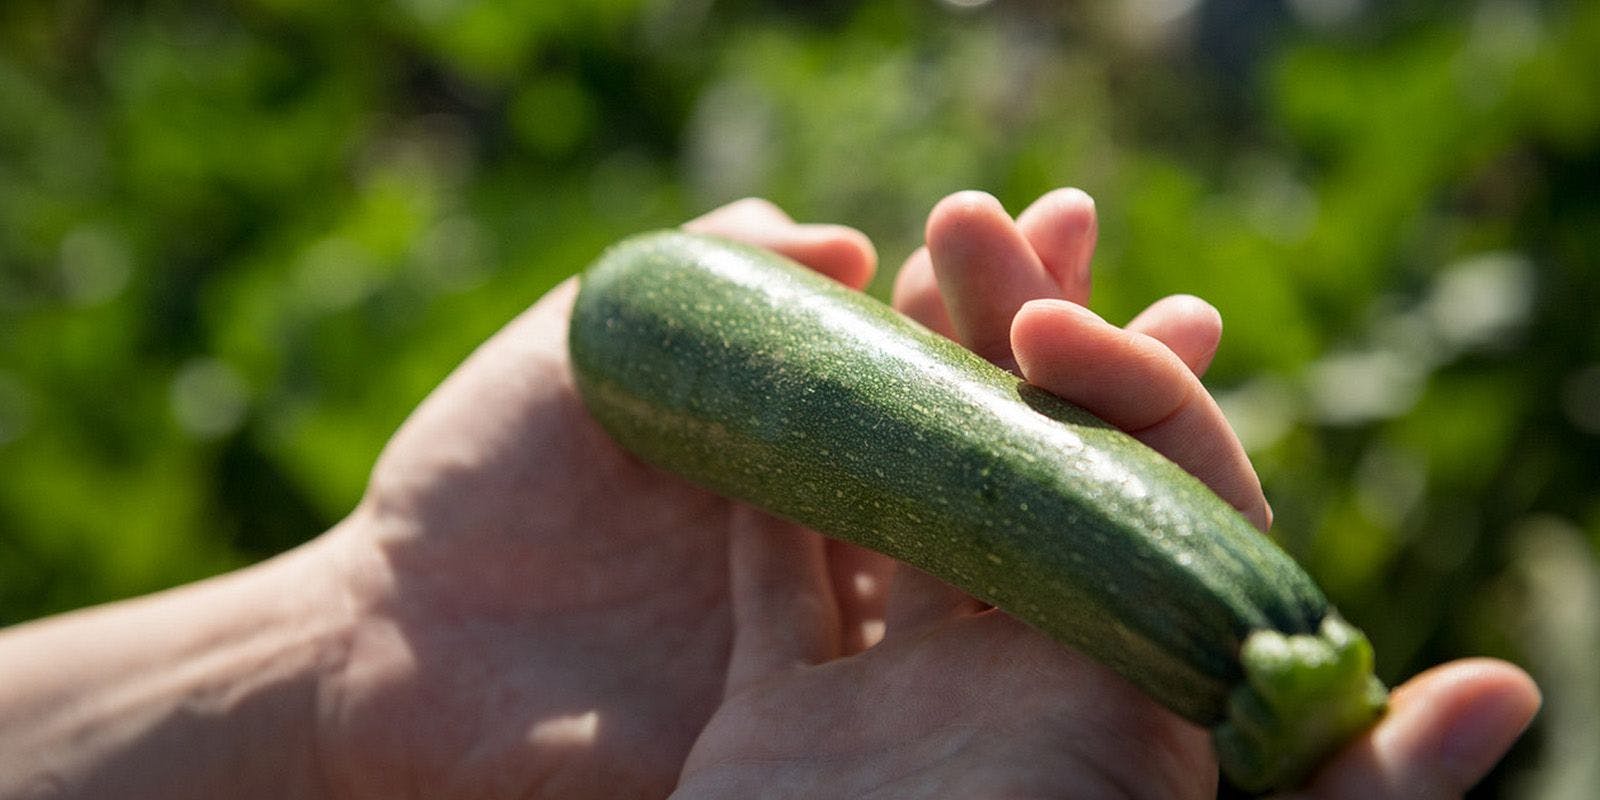 A man holding zucchini in his hands